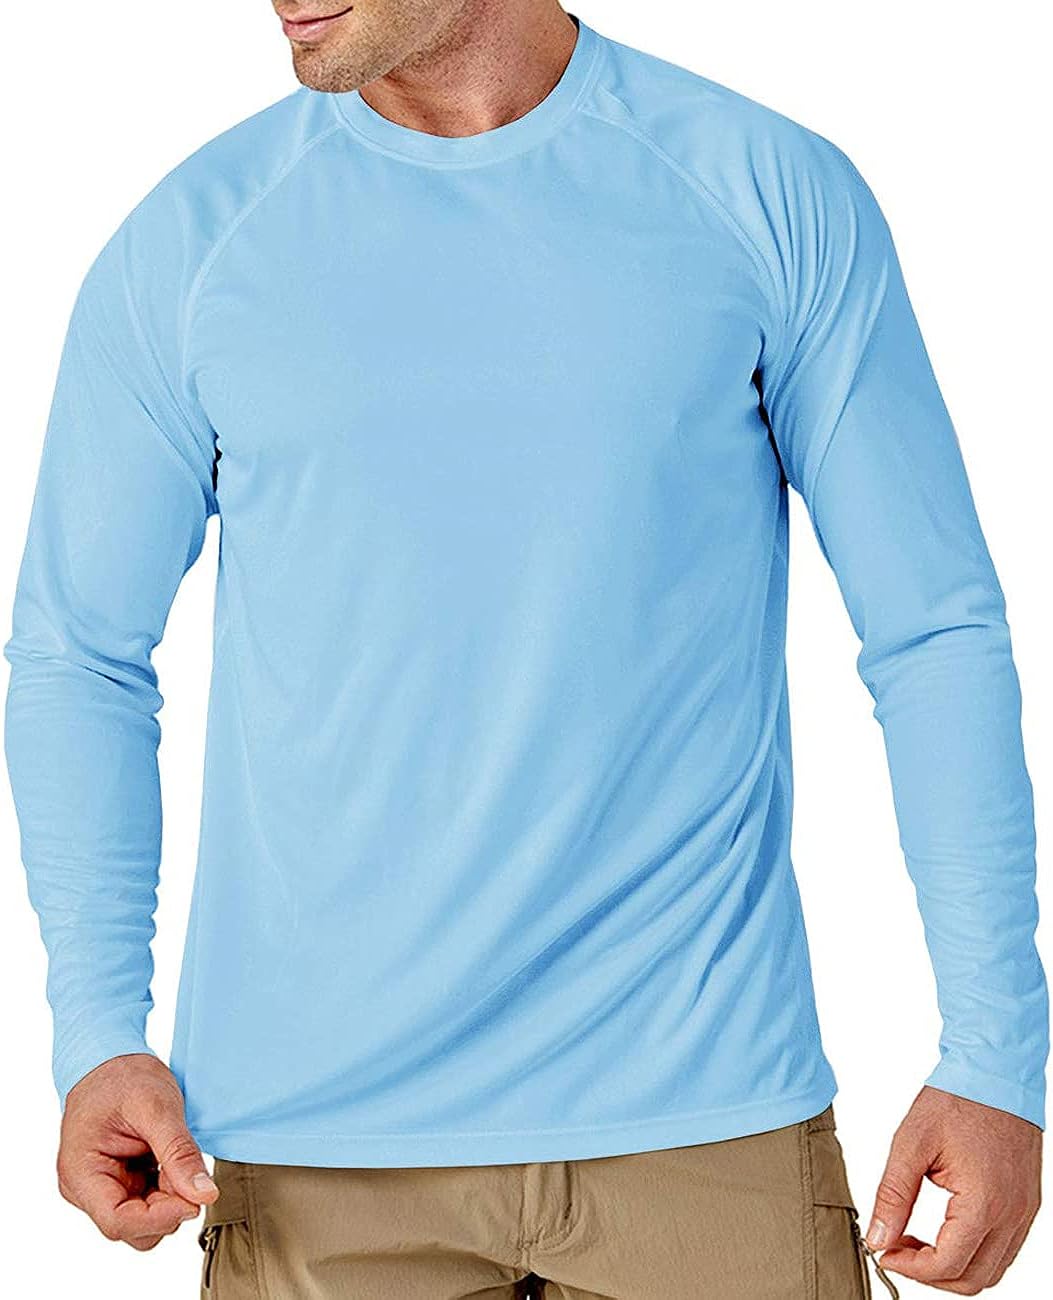 Outdoor Sun Protection Dry Fit Cooling Hiking Fishing Shirts Long Sleeve Shirt Mens UPF50 